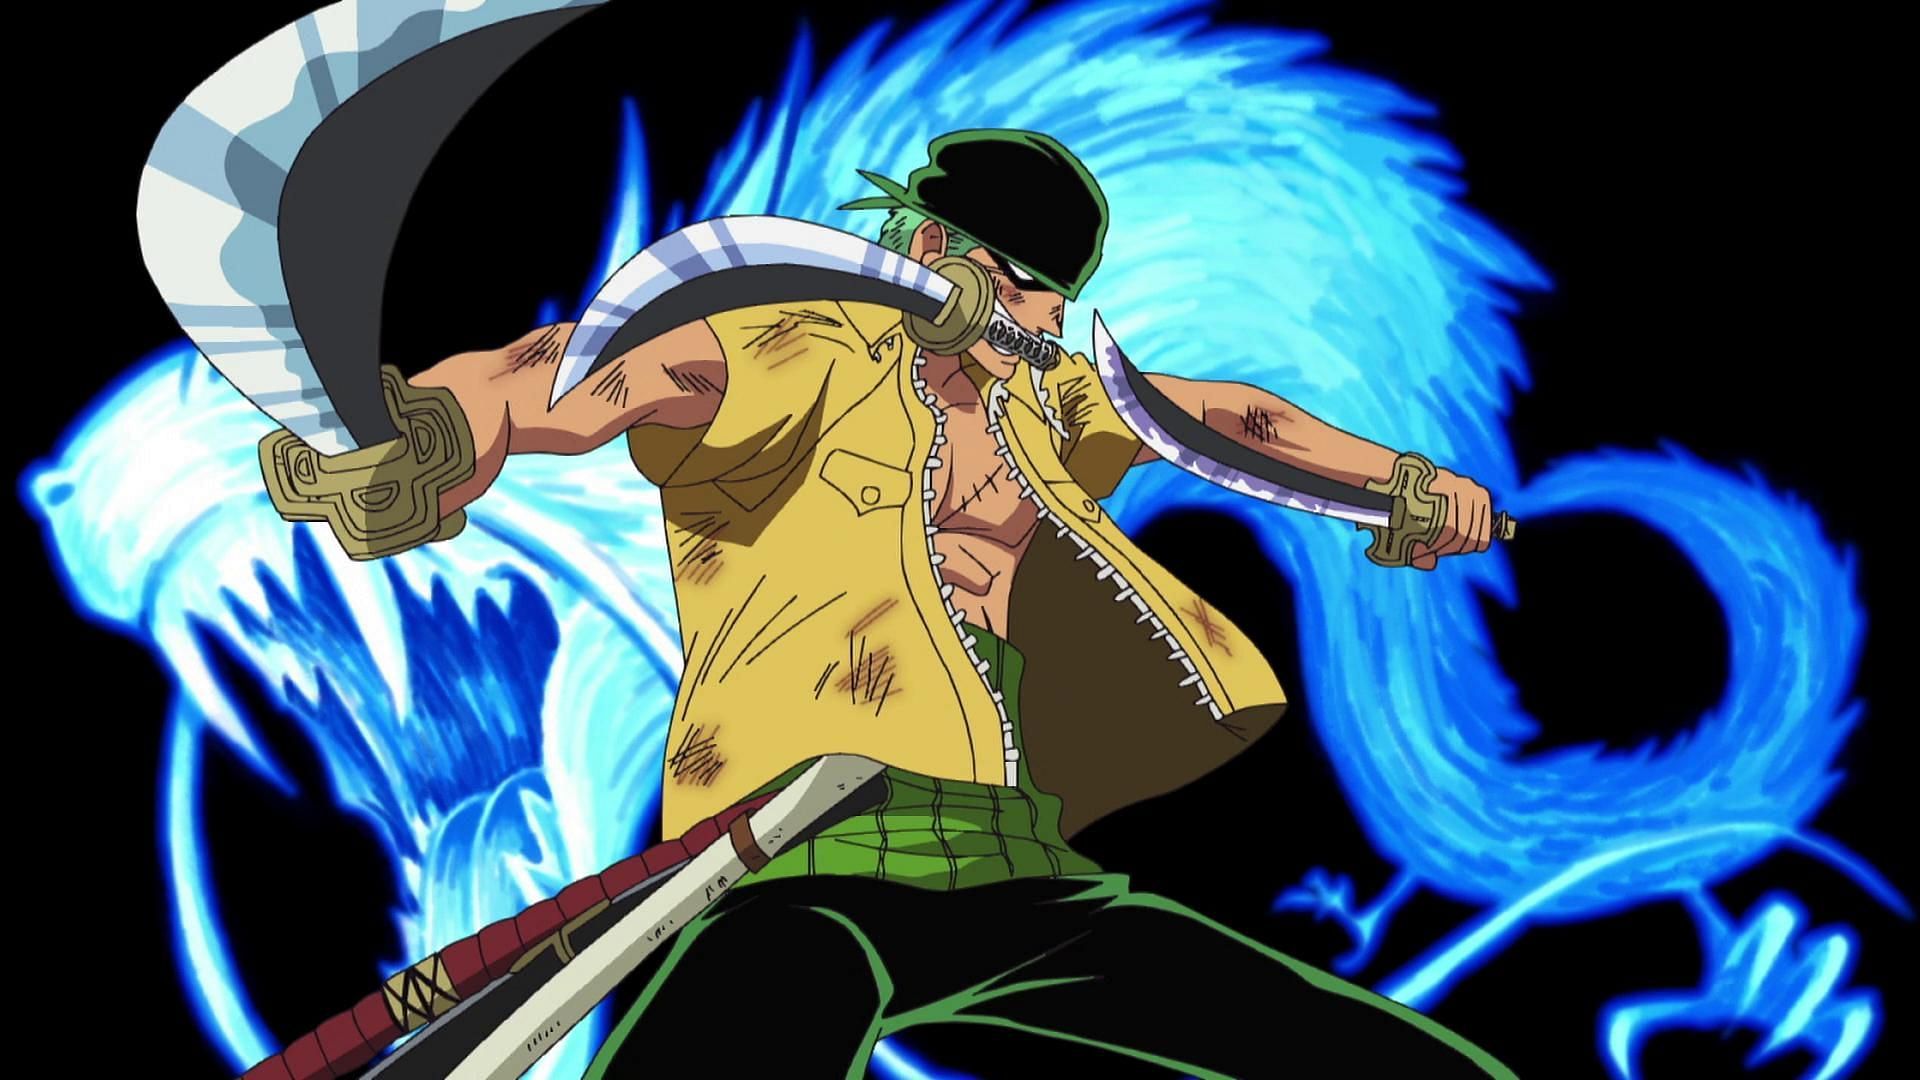 In Enies Lobby, Zoro revealed the outstanding Nine Sword Style (Image via Toei Animation, One Piece)